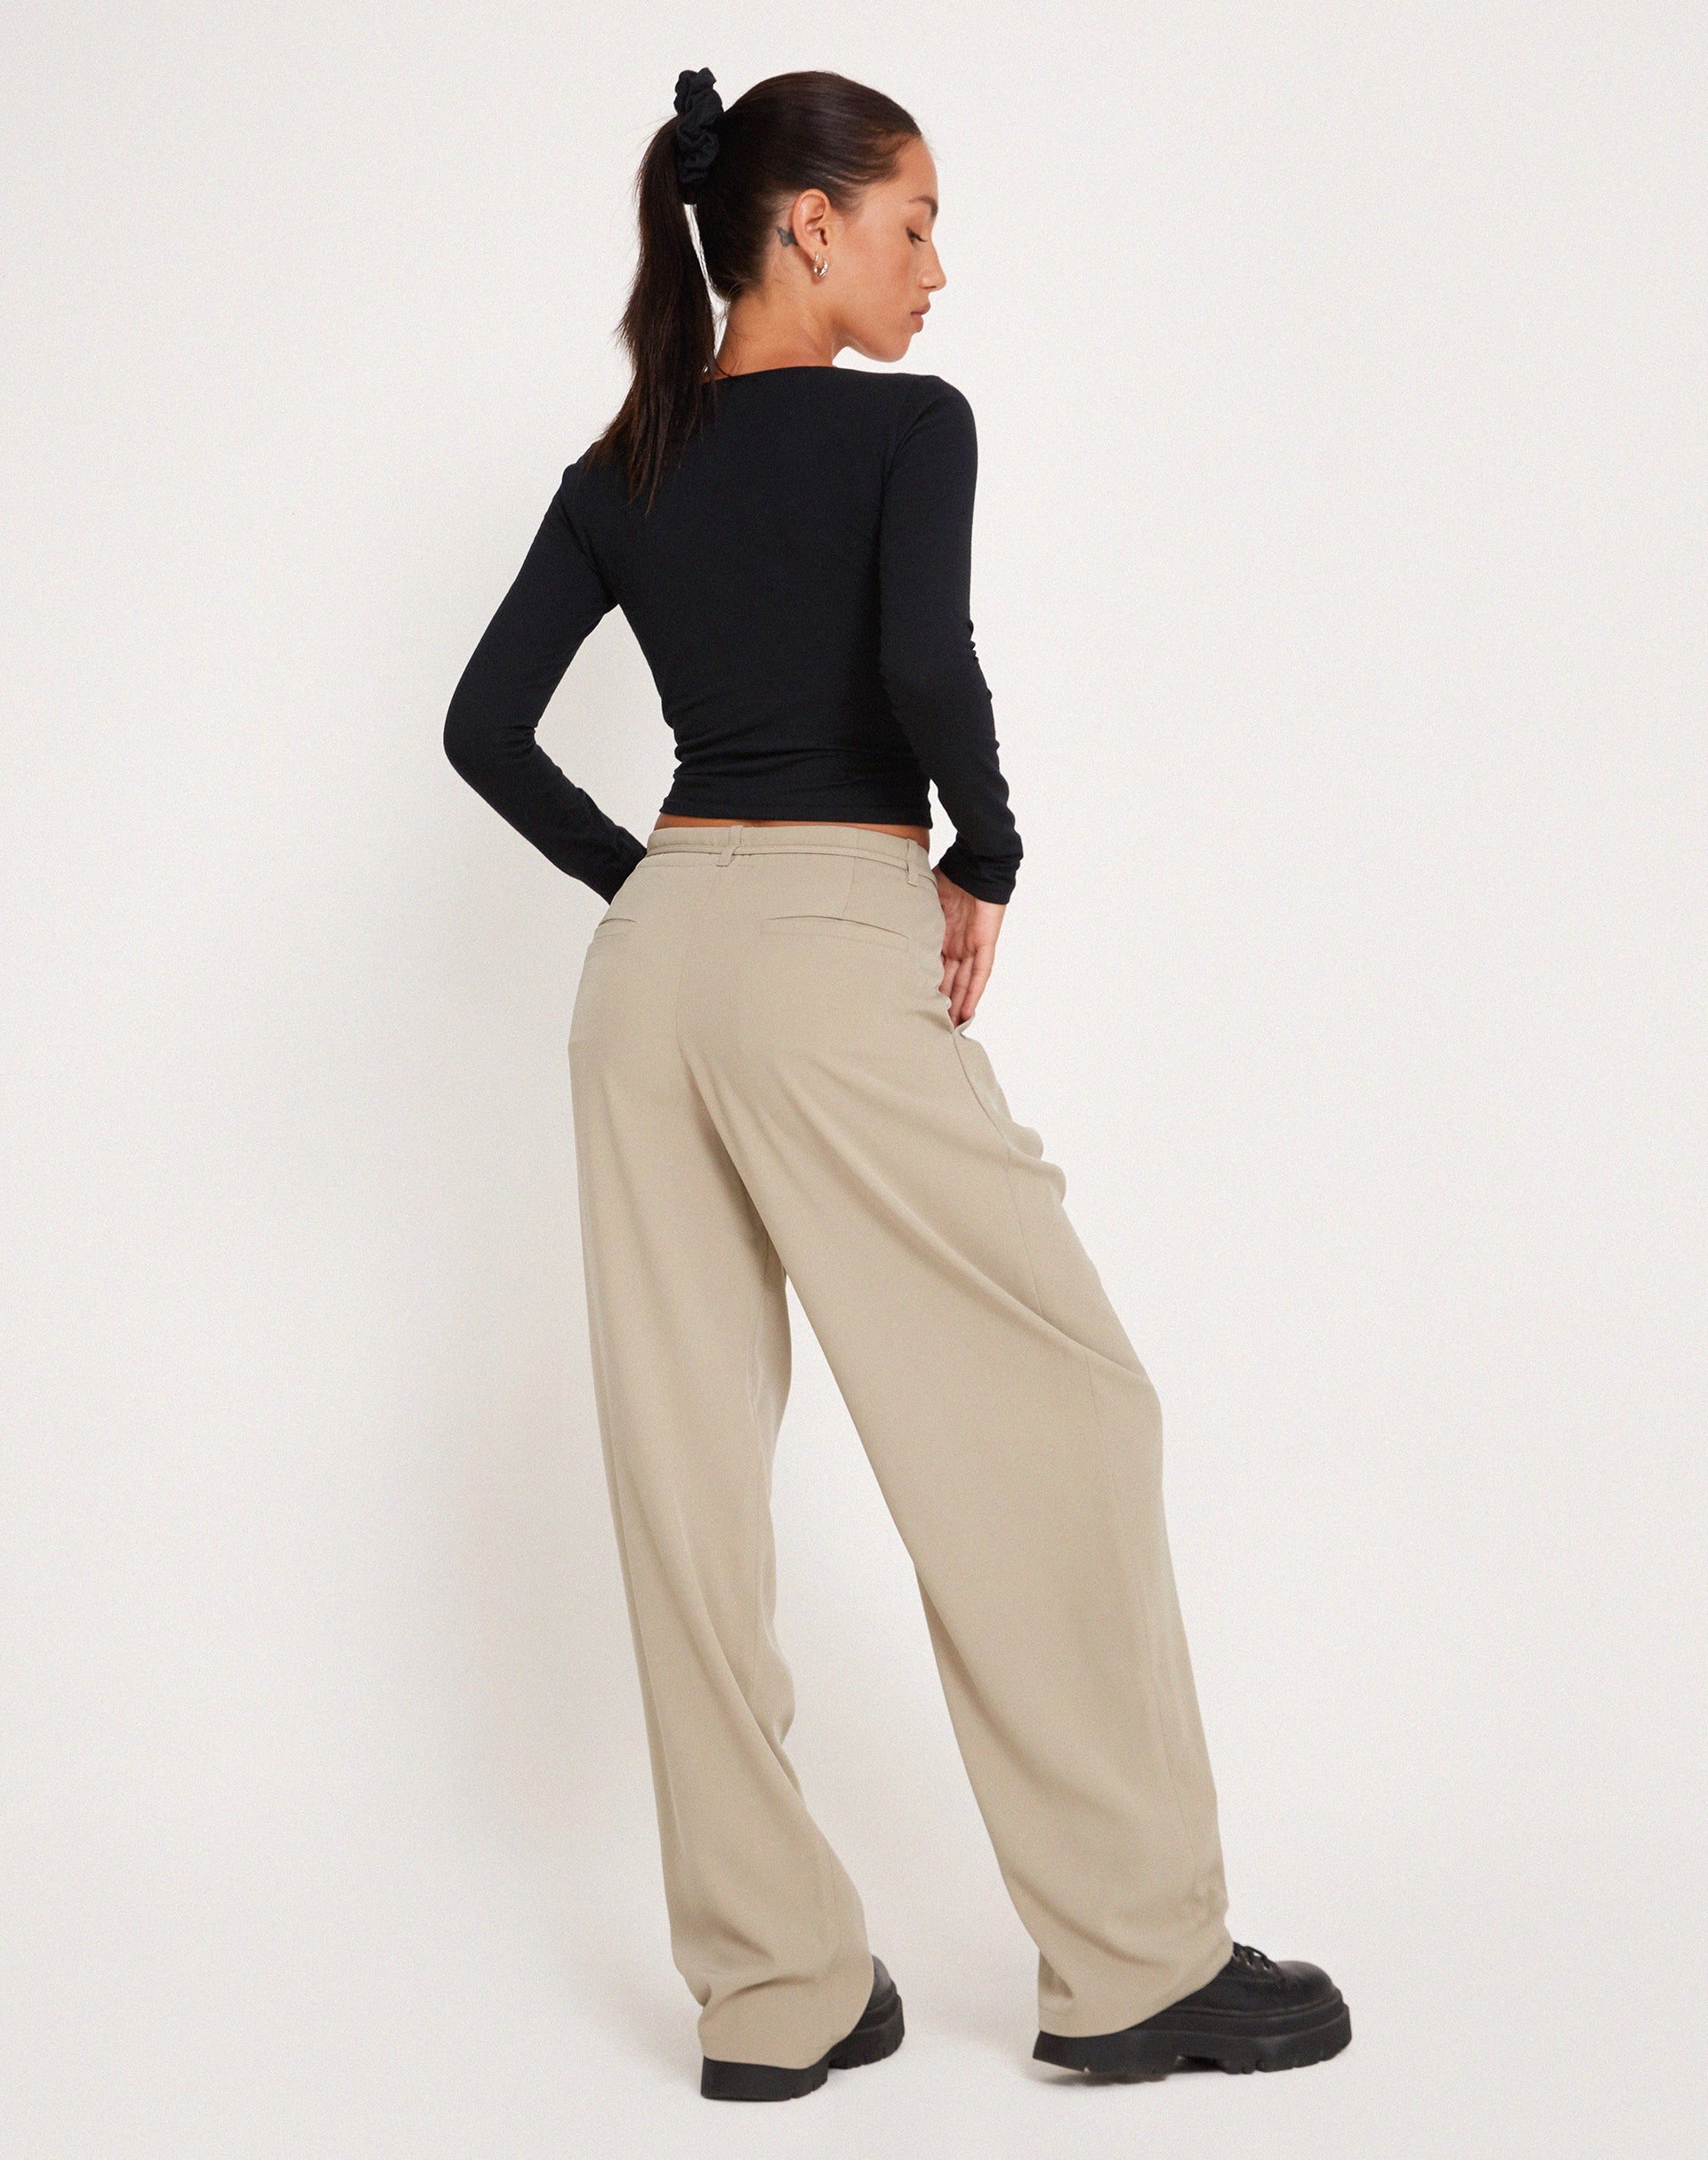 Sabria Trouser in Tailoring Taupe